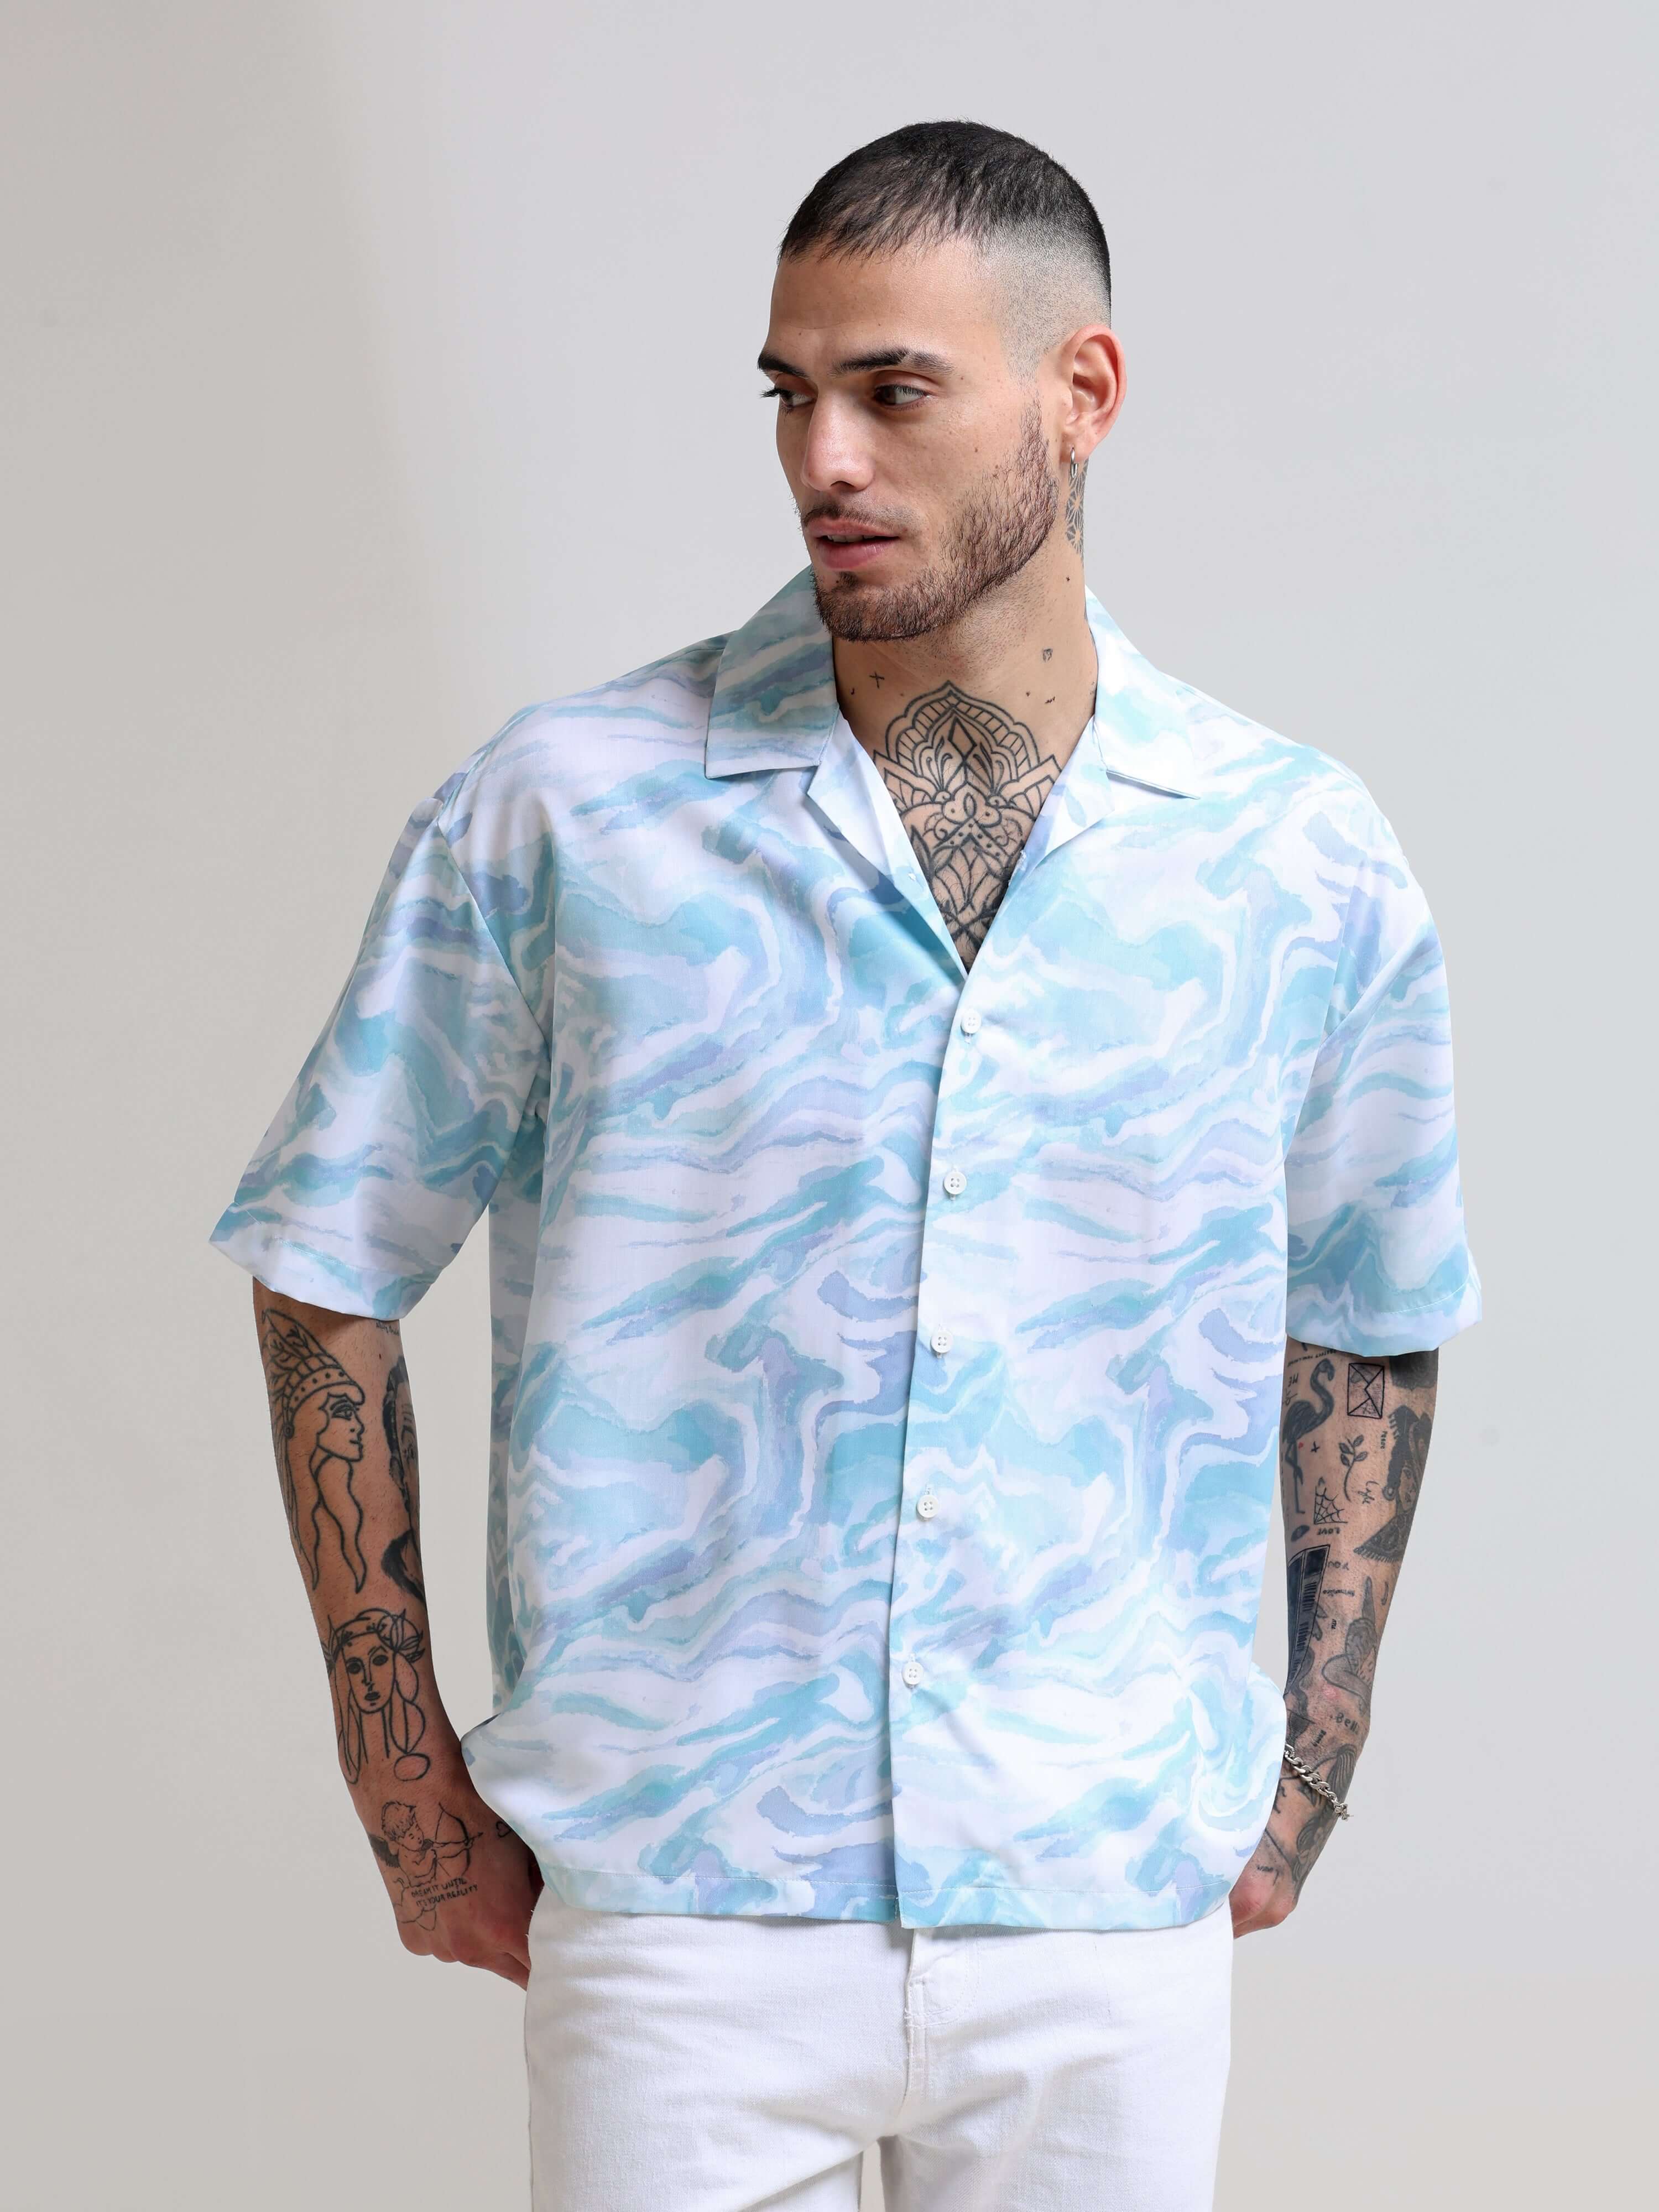 Marble Wave Oversized Shirt shop online at Estilocus. Our Marble Wave Oversized Shirt is perfect for those Hawaiian days. The relaxed fit and lightweight fabric make it comfortable to wear all day. Its classic style is perfect for those summer streetwear